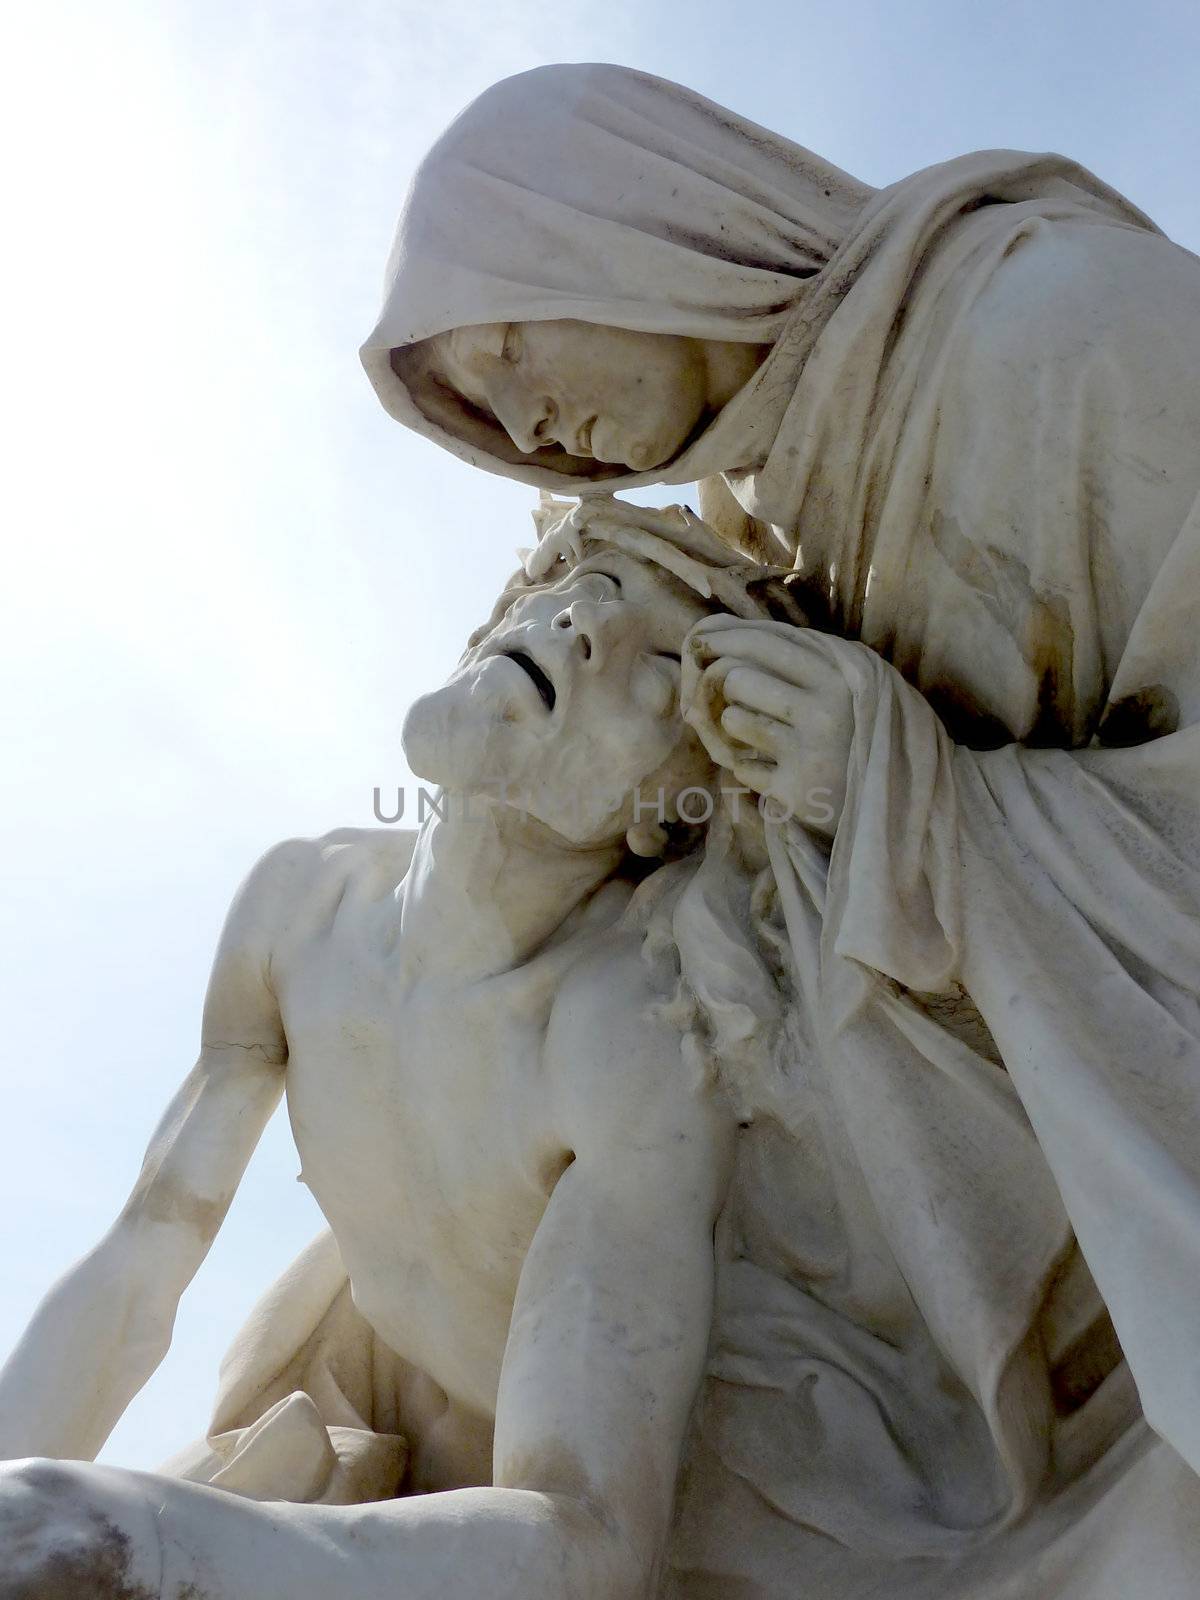 Statue made of white stone of Jesus and Mary at Marseilles mext to Notre-Dame de la Garde basilic